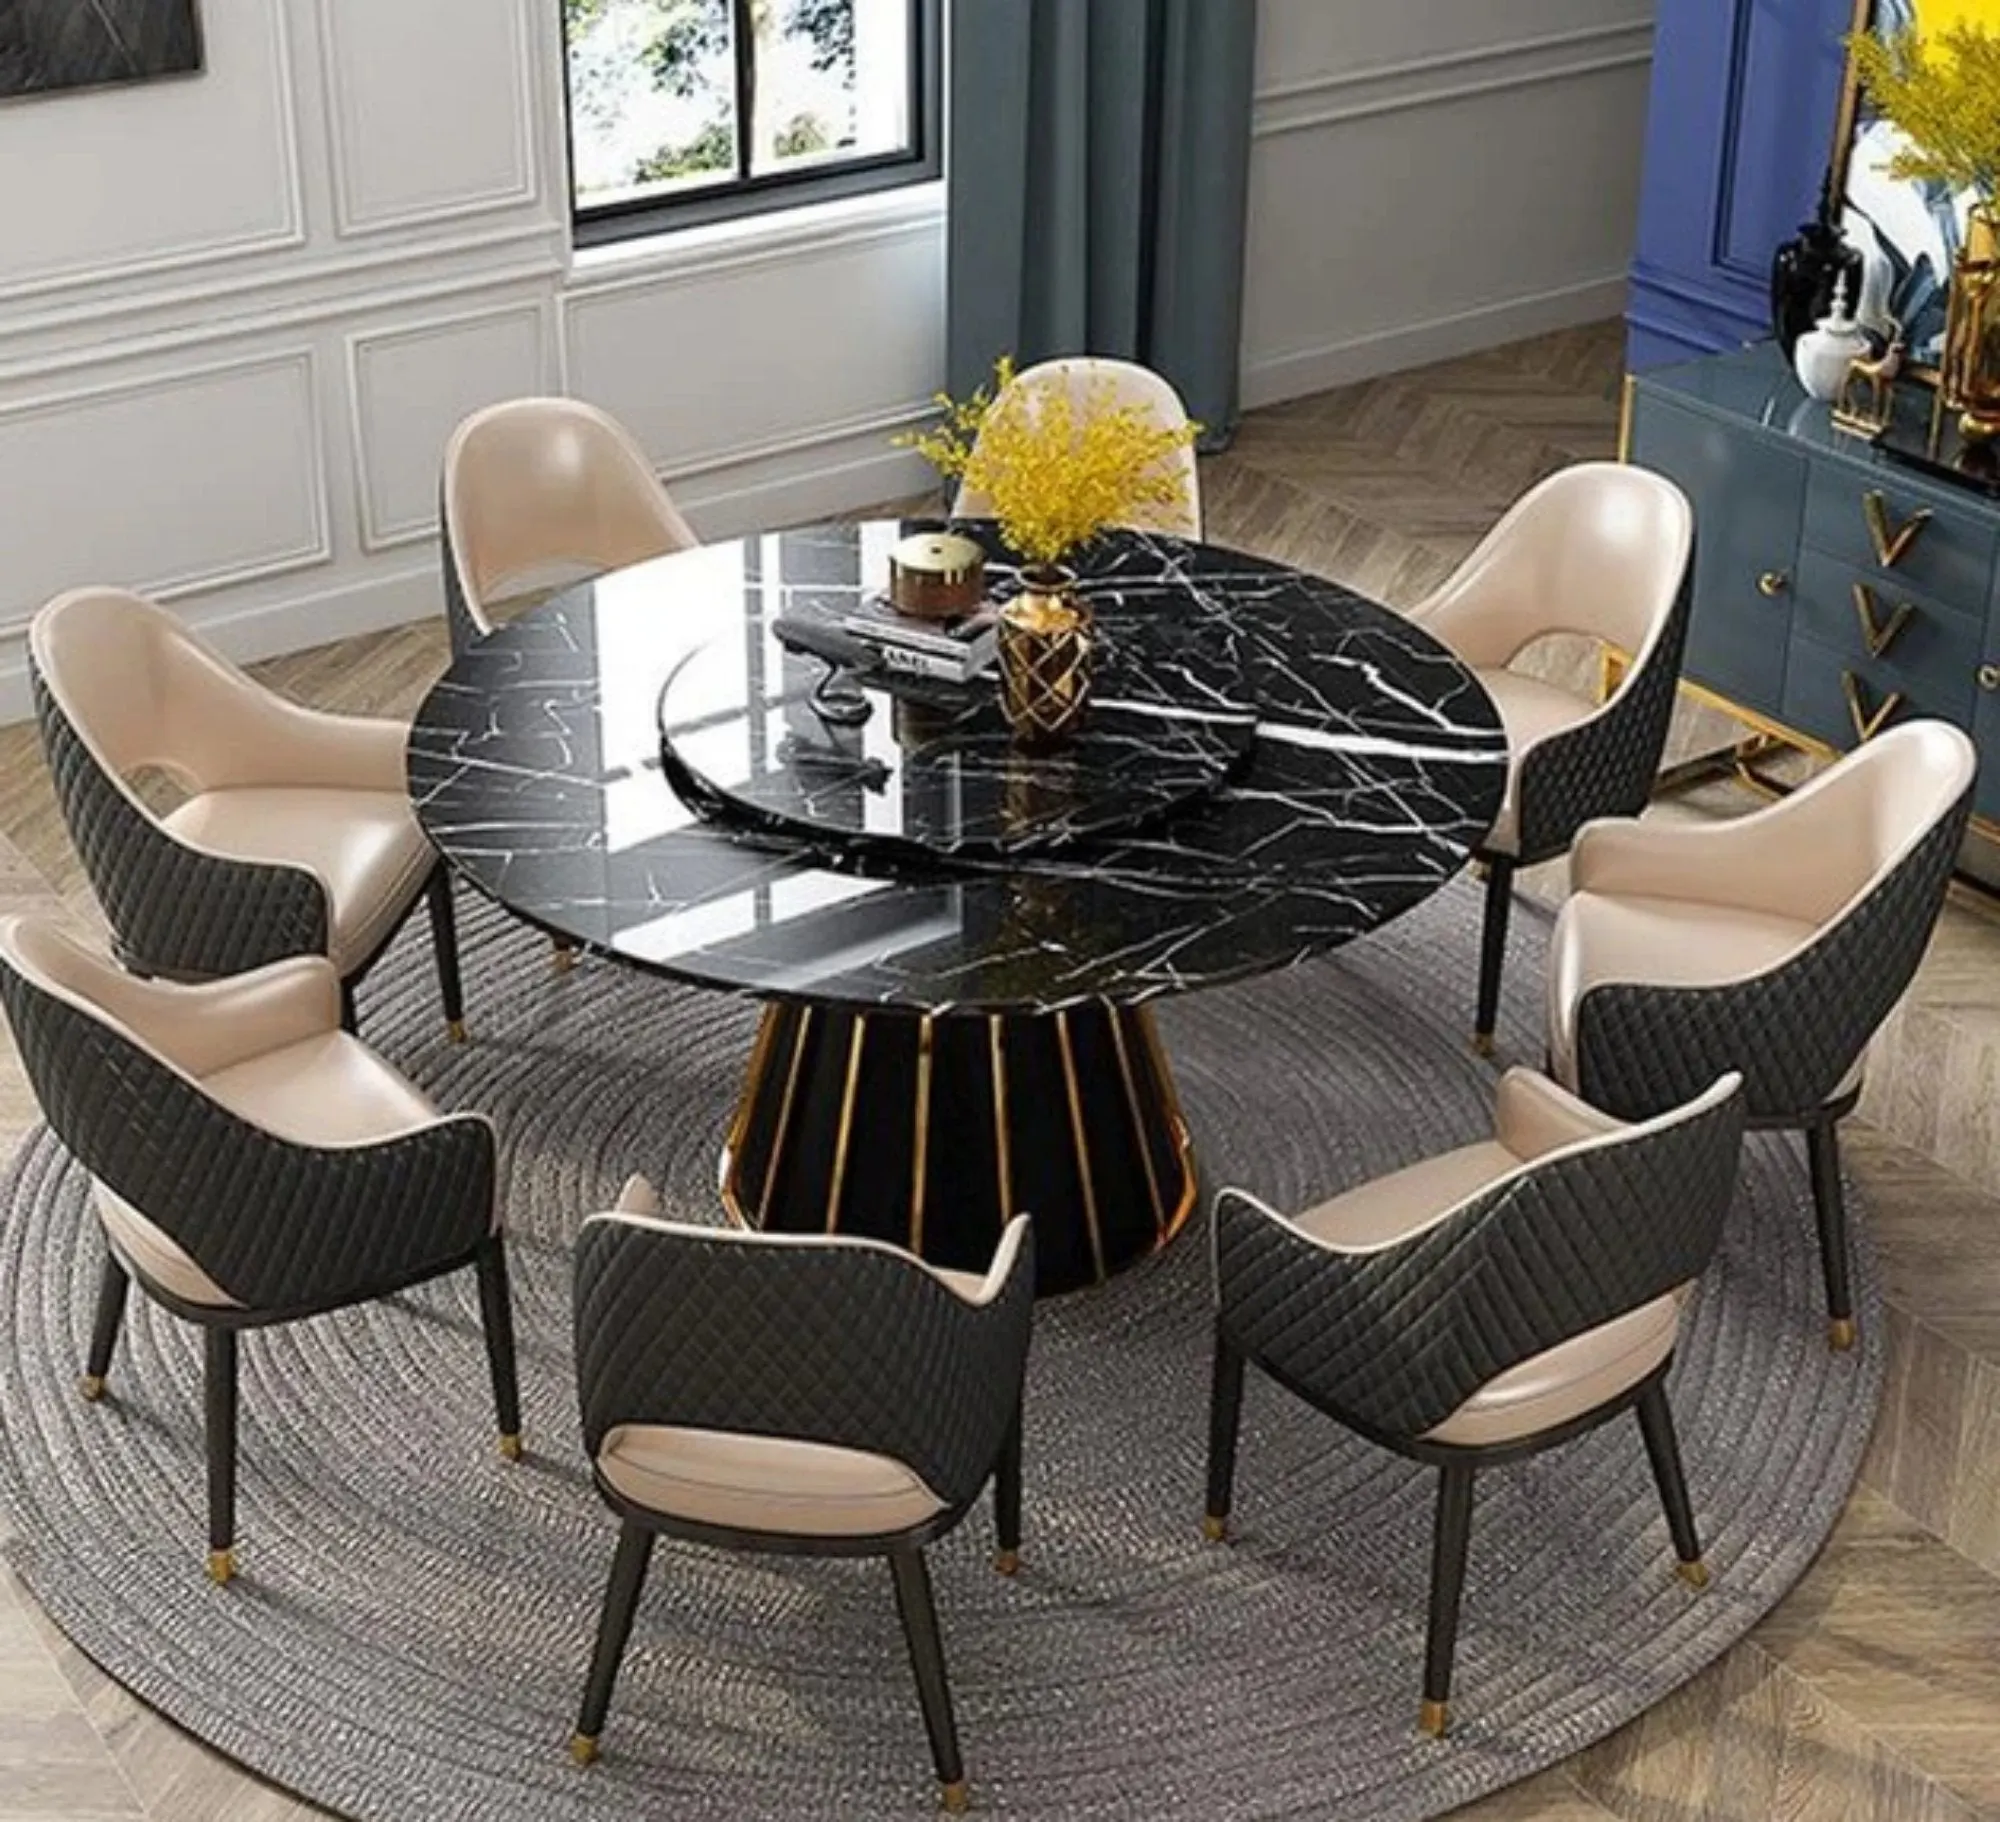 How To Decorate A Black Dining Table